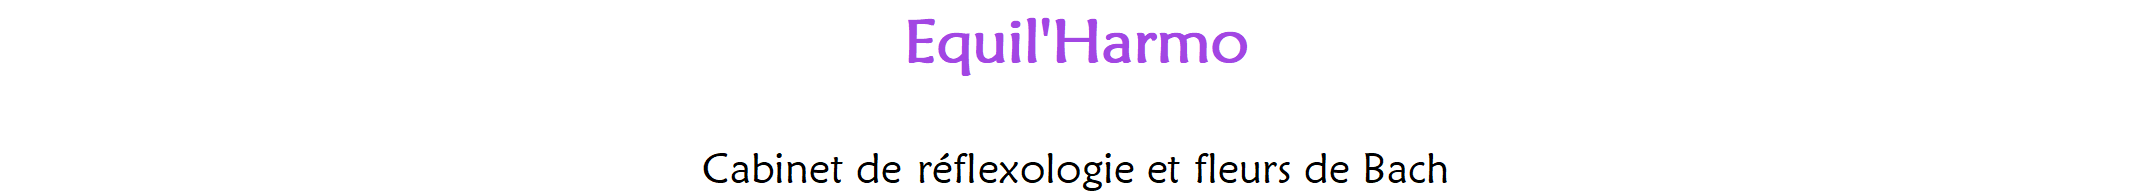 Equil'harmo